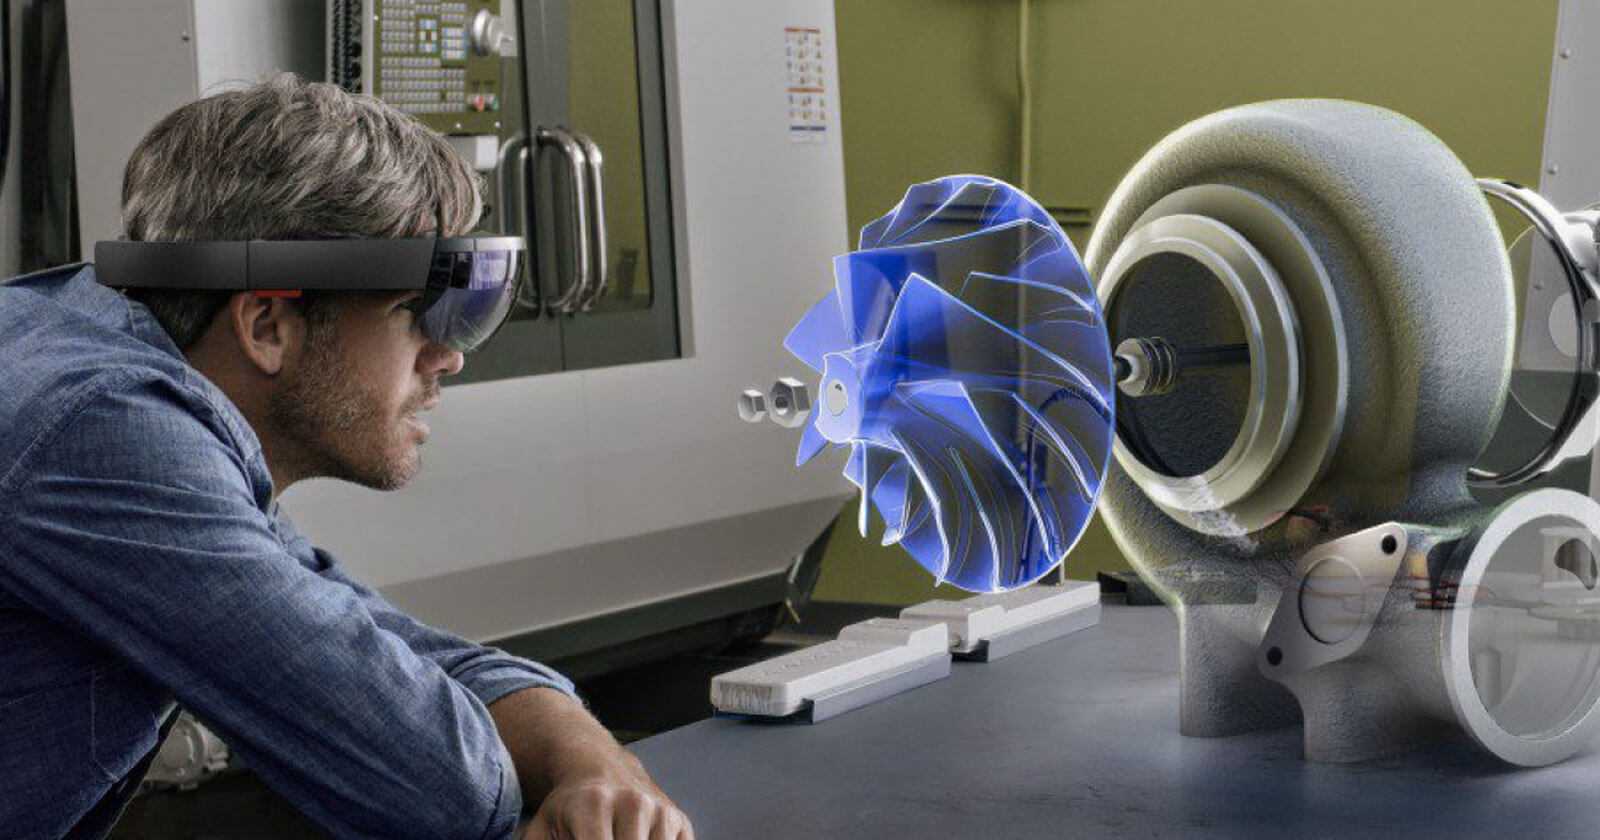 What You Need to Know about Microsoft Hololens - Visartech Blog